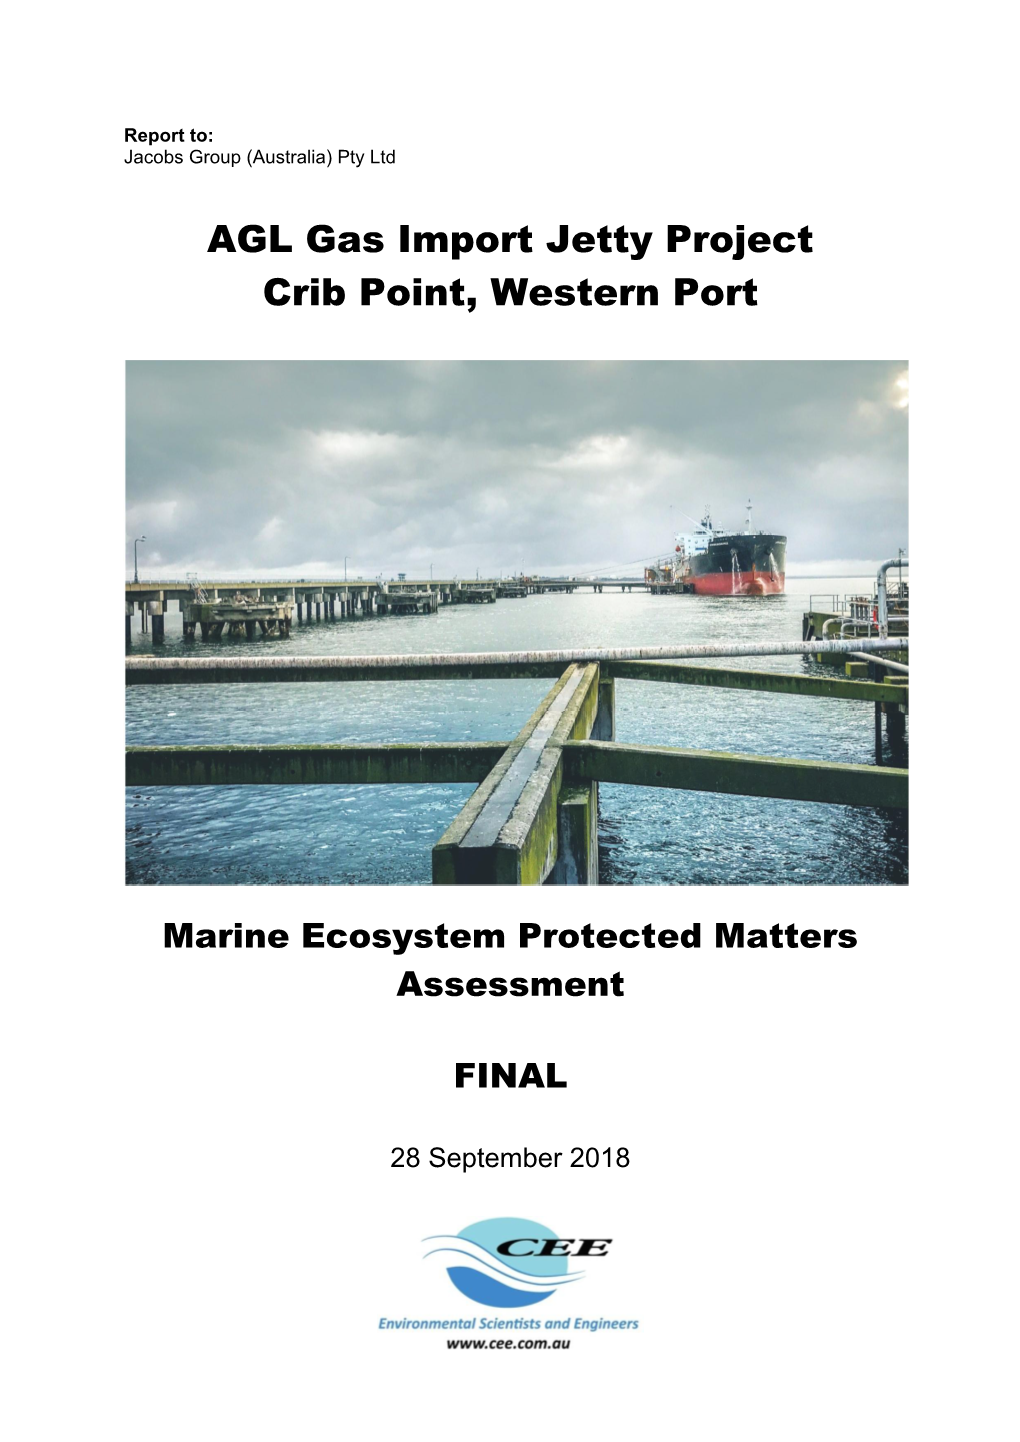 AGL Gas Import Jetty Project Crib Point, Western Port